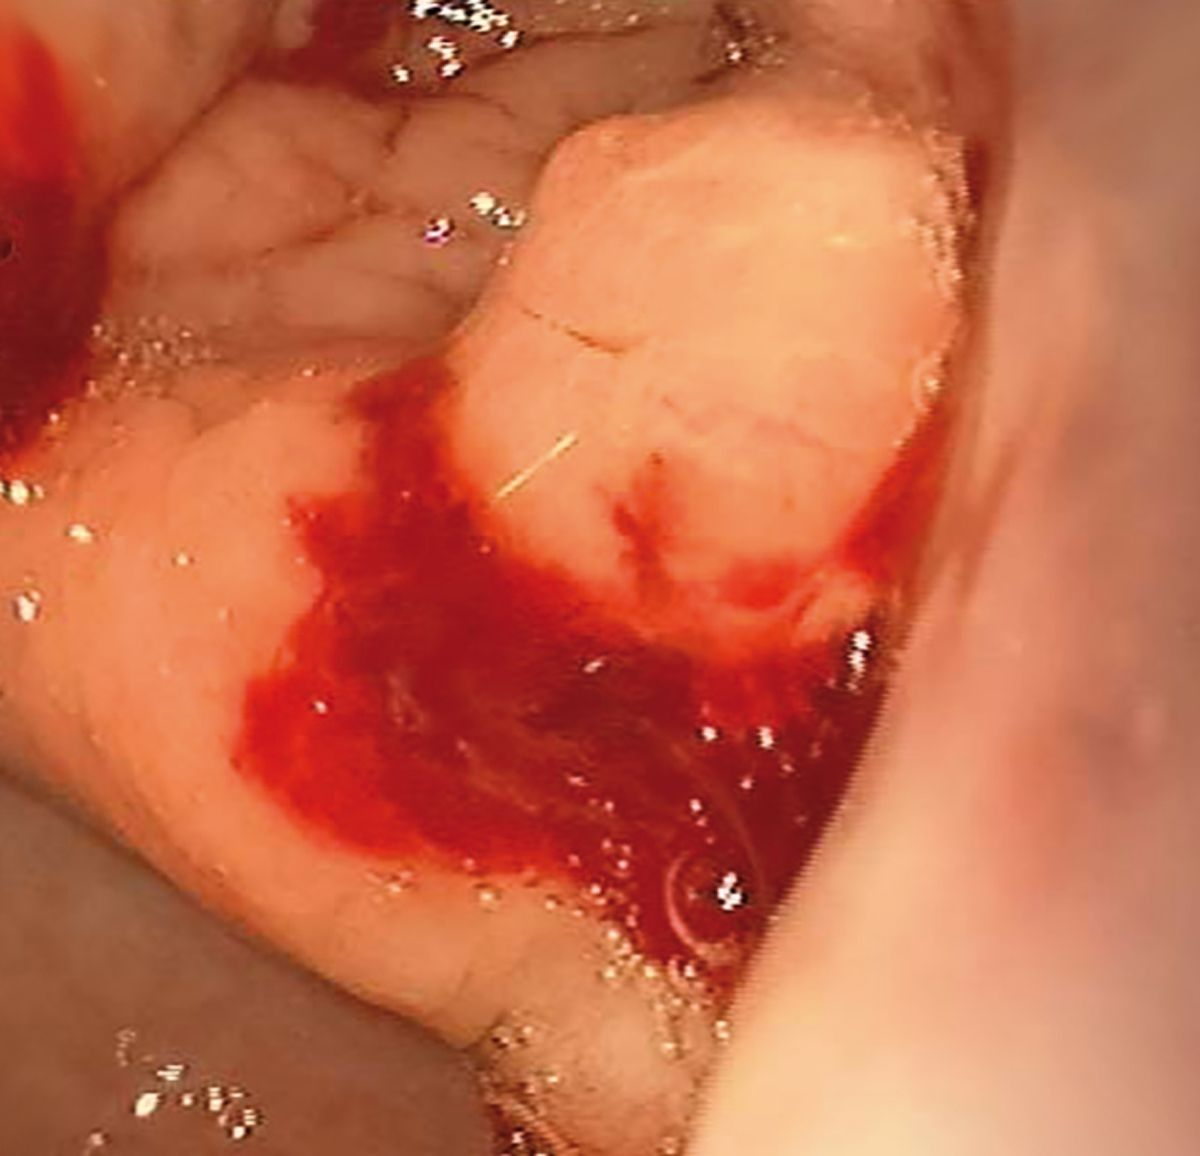 Endoscopy revealed changes suggestive of gastric cancer. Note the polypoid, thickened angular notch, with post-biopsy bleeding.